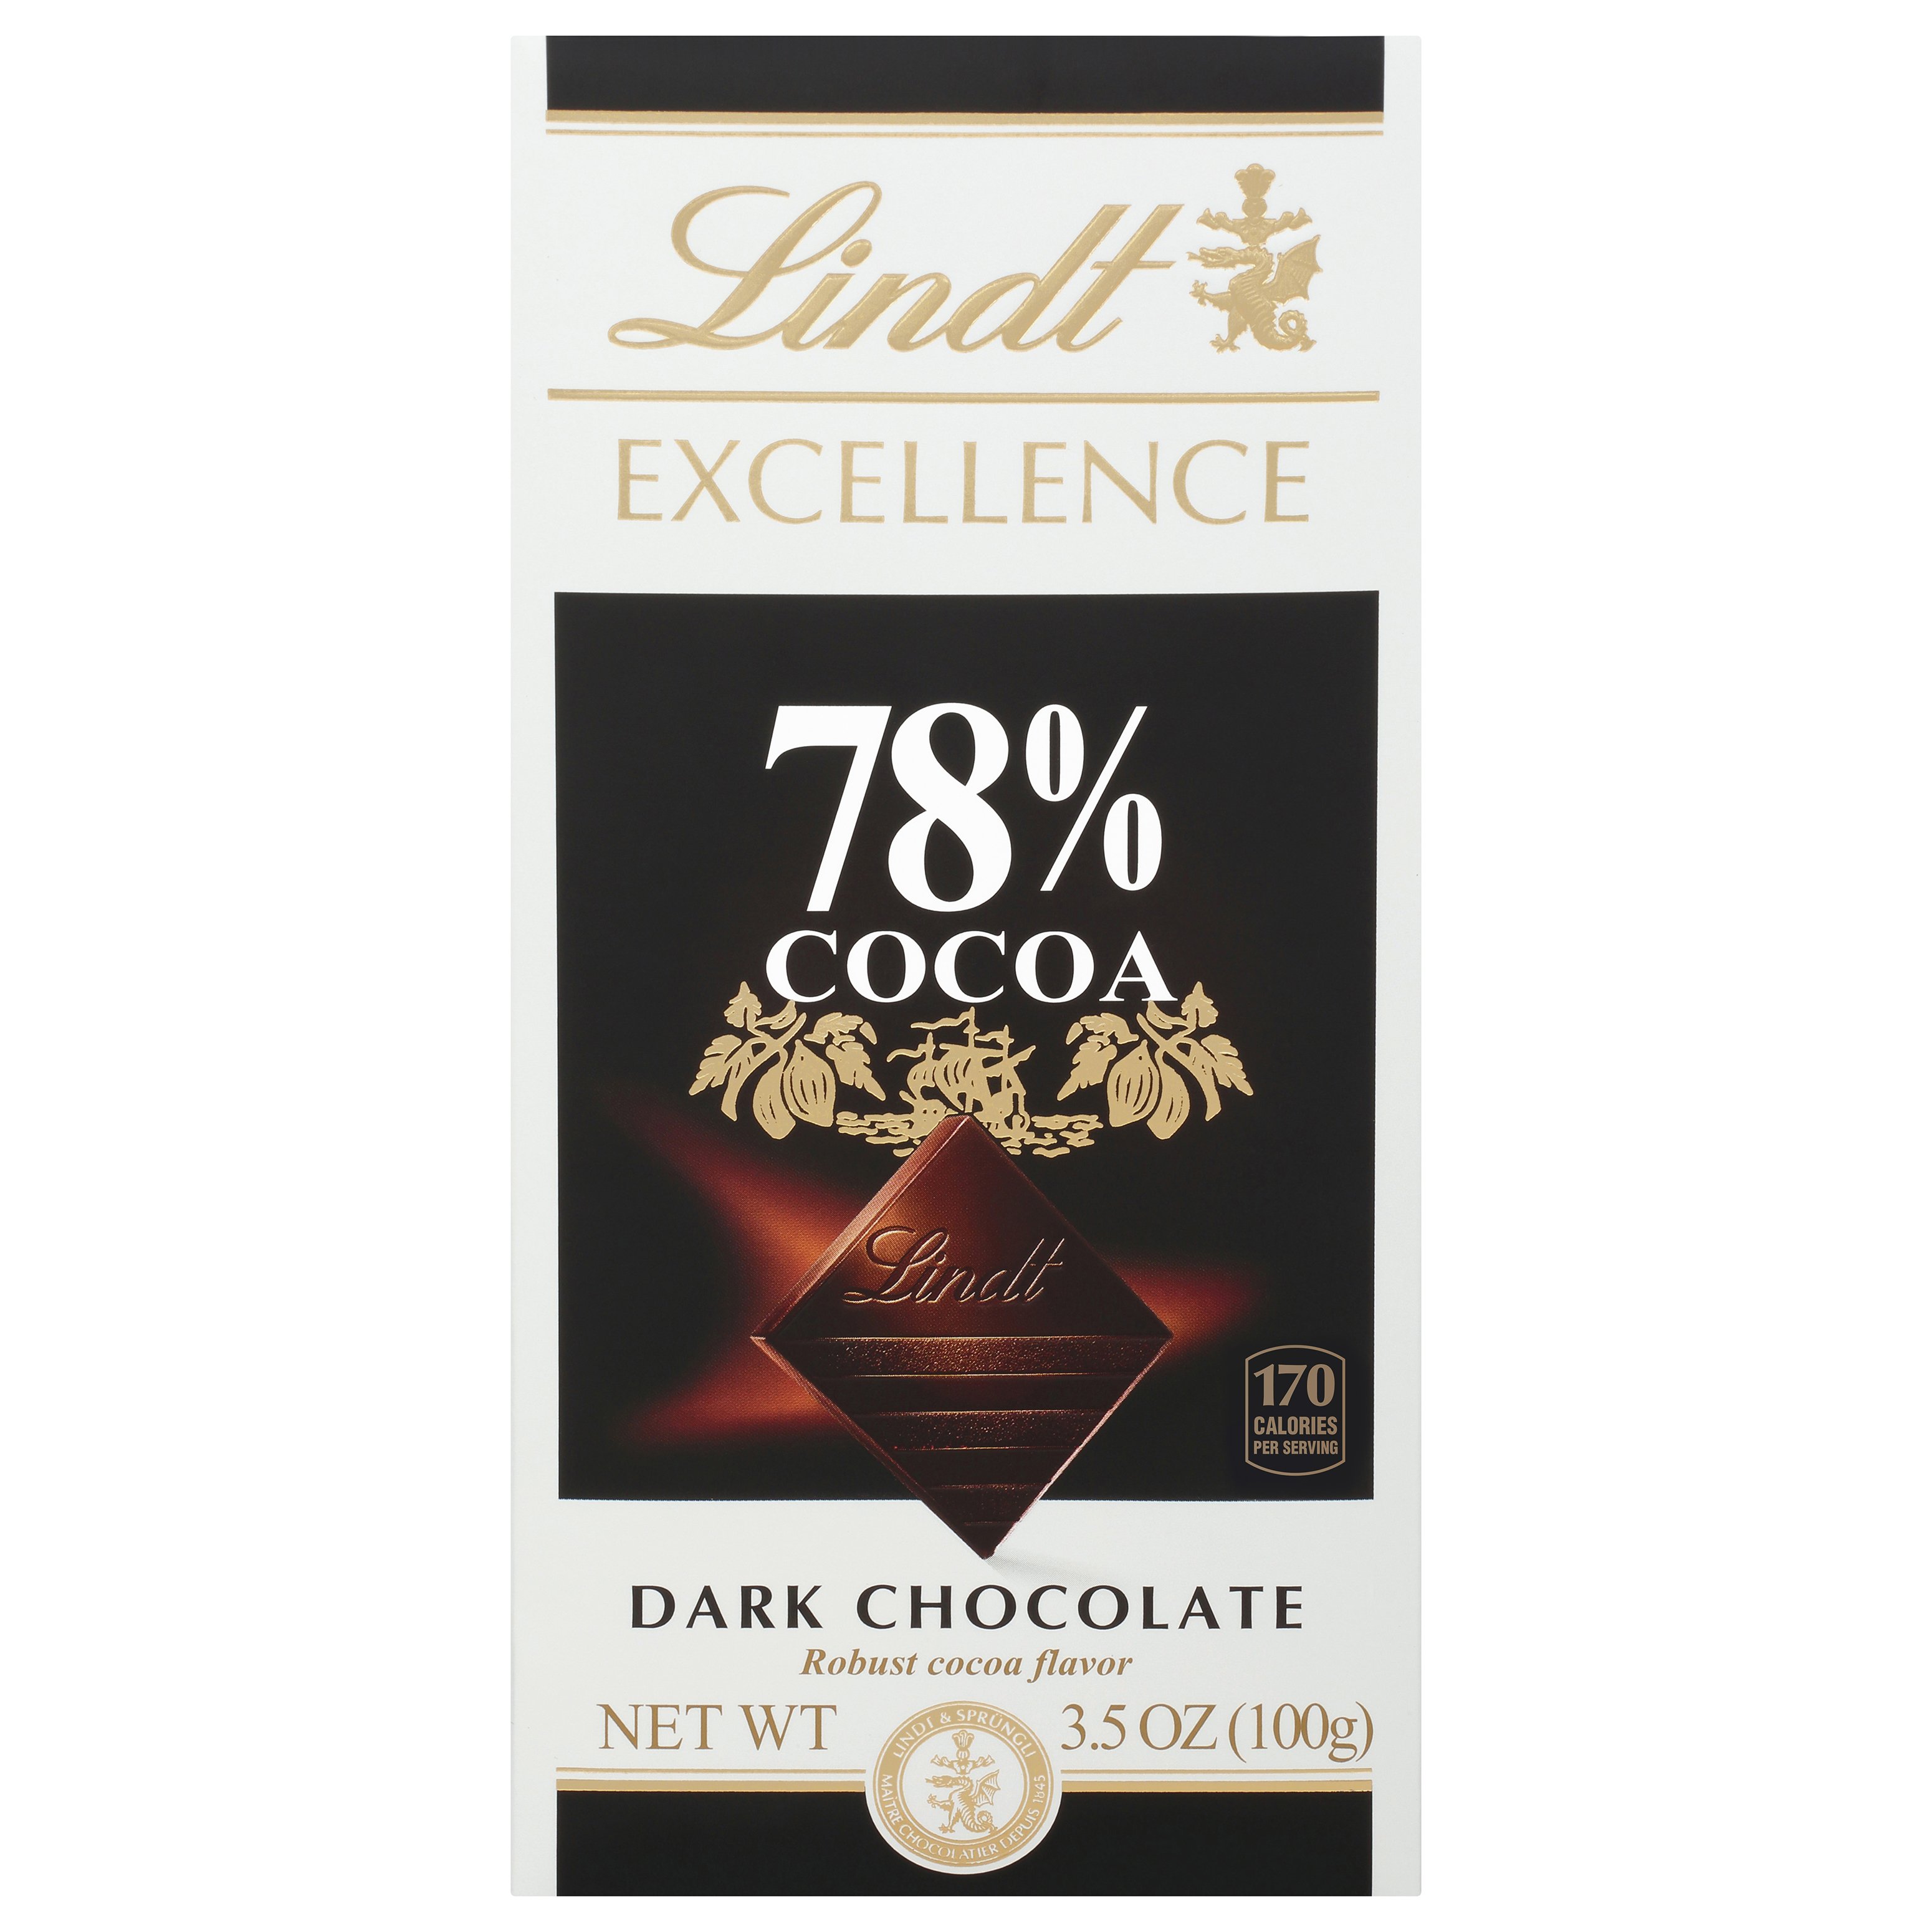 Is 78% dark chocolate good for you?